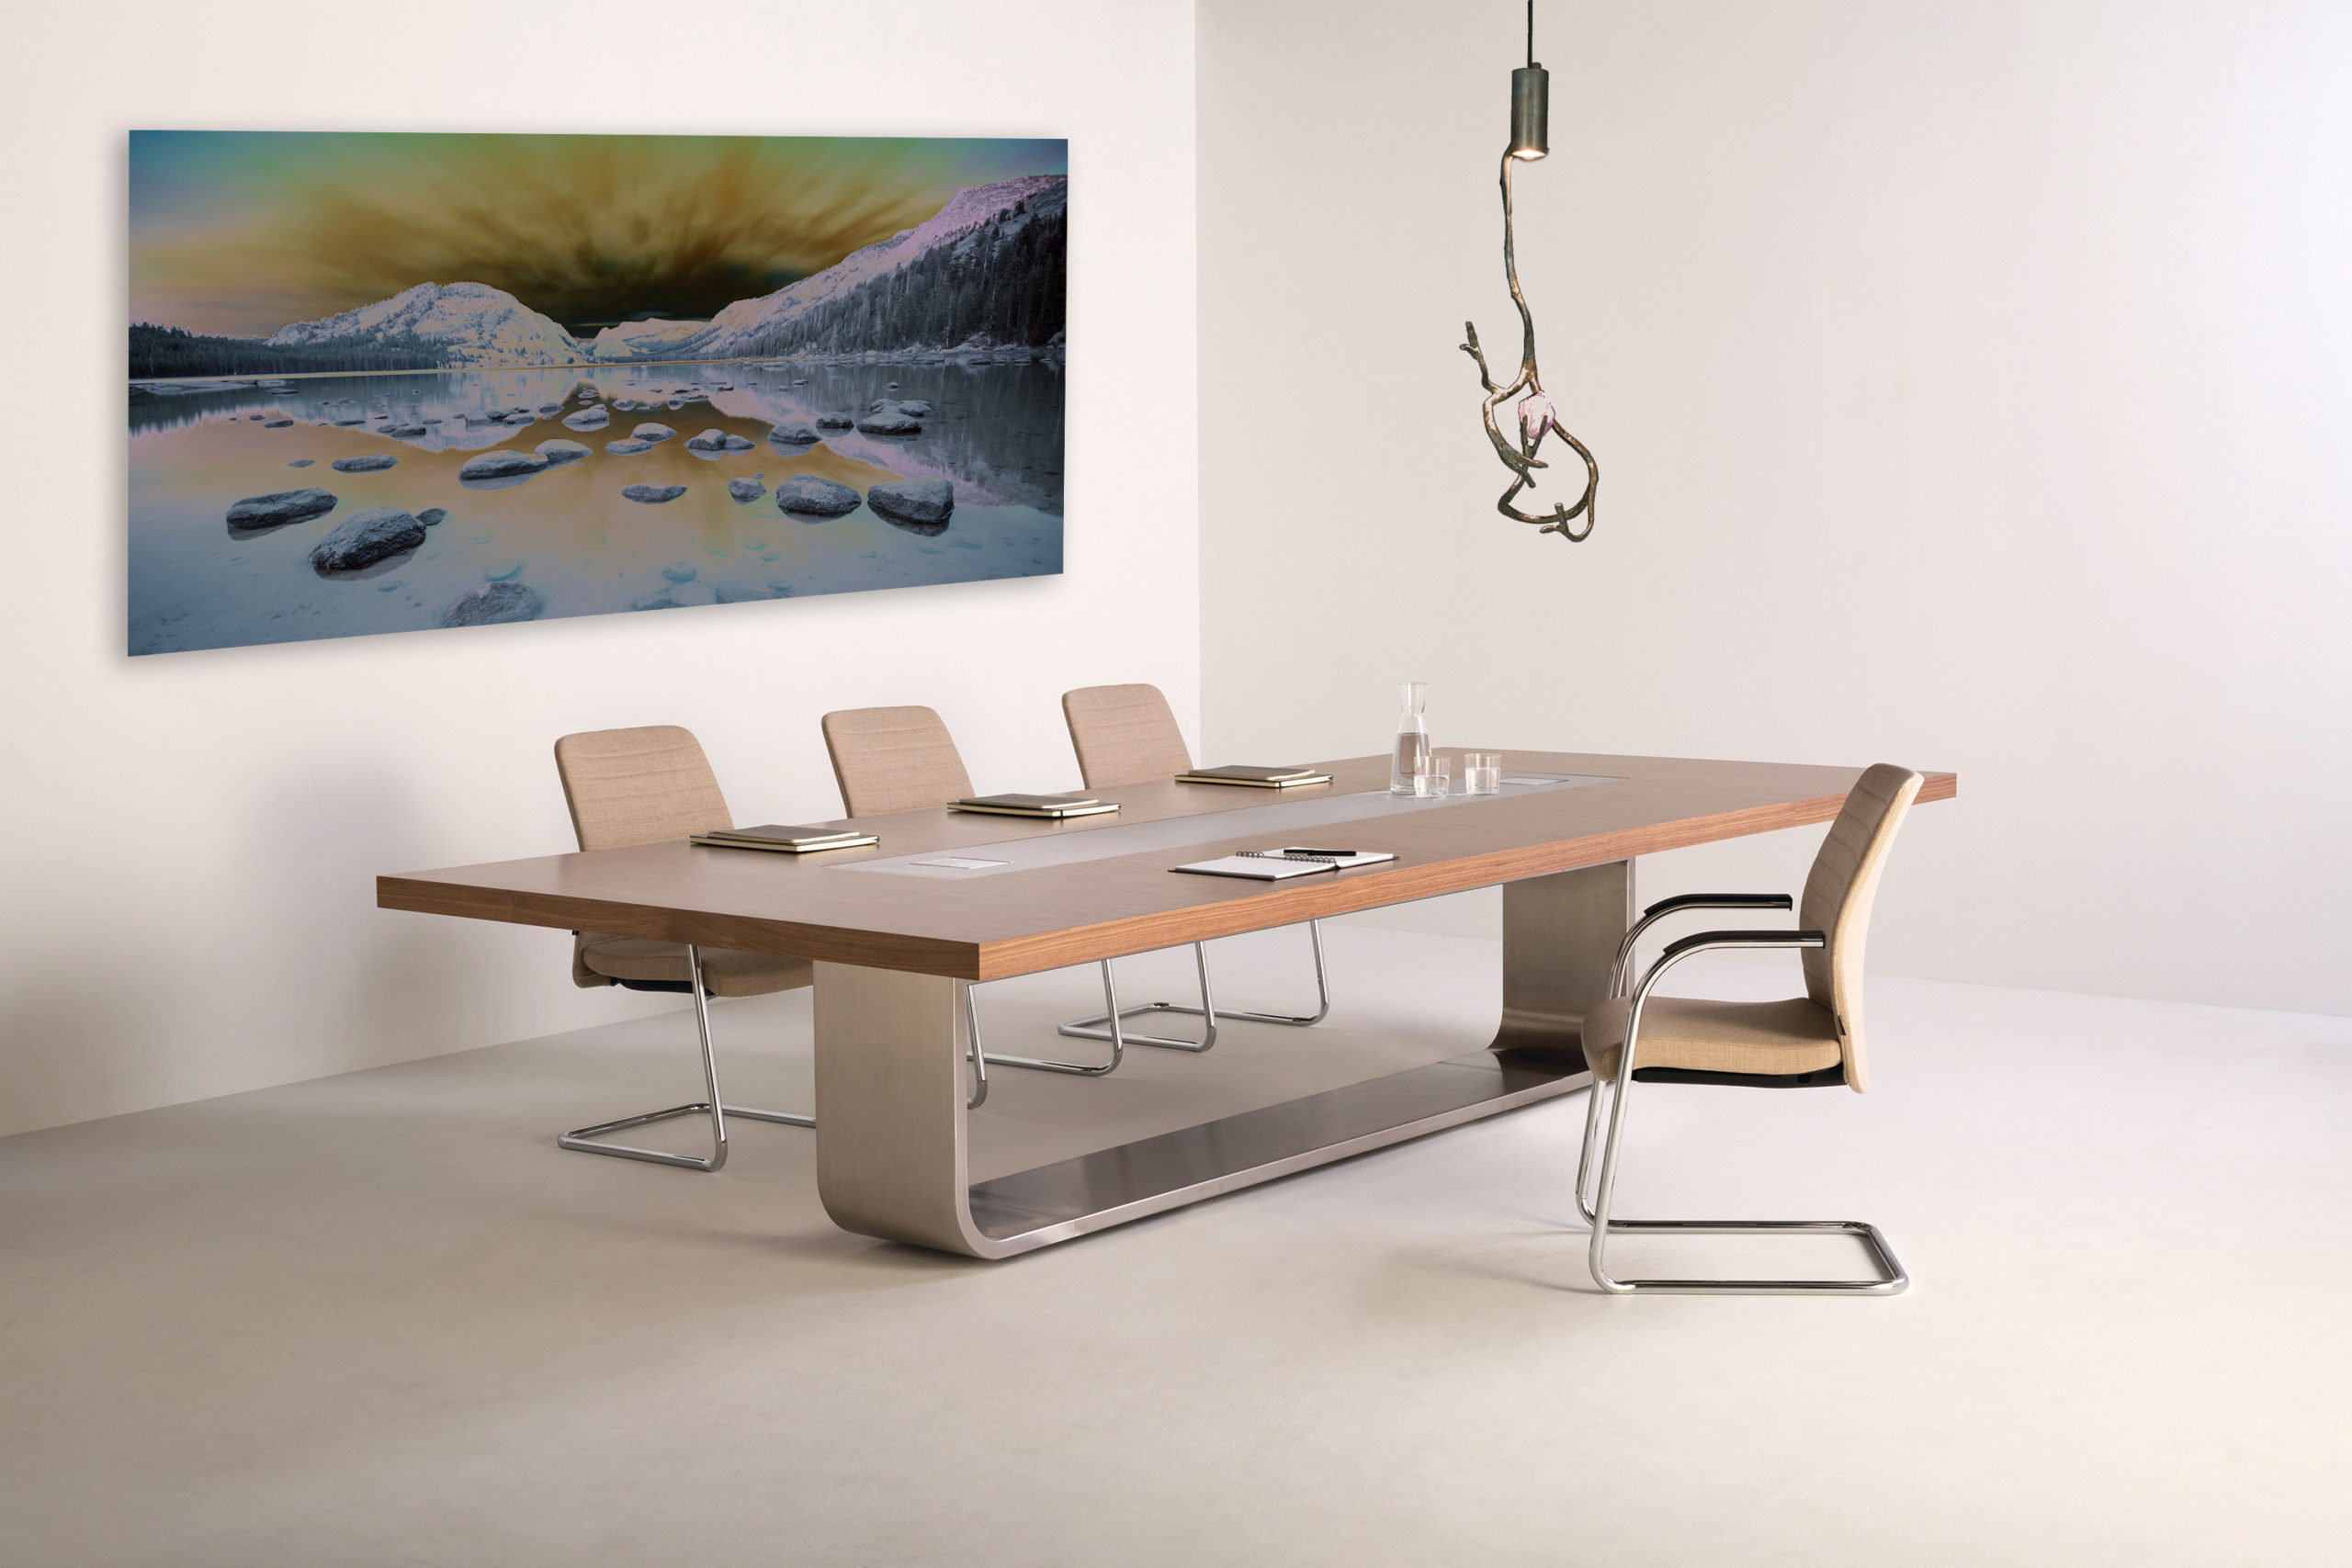 Spectacular Dyno Table For the ultimate in board room tables